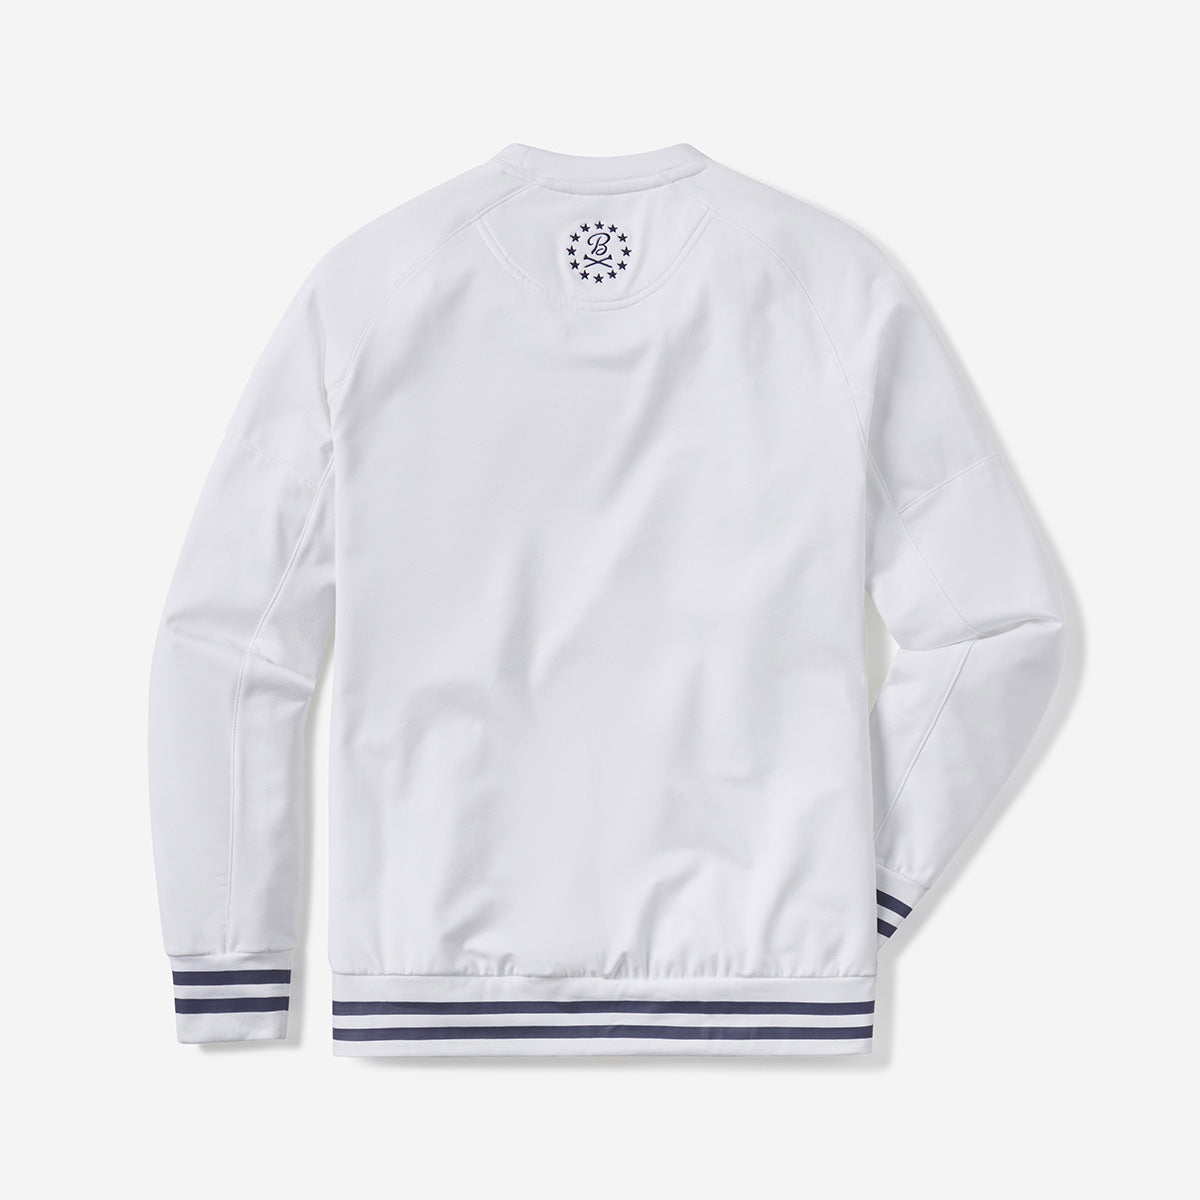 UNRL x Barstool Ryder Cup Trophy Crossover Crewneck-Crewnecks-Fore Play-Barstool Sports